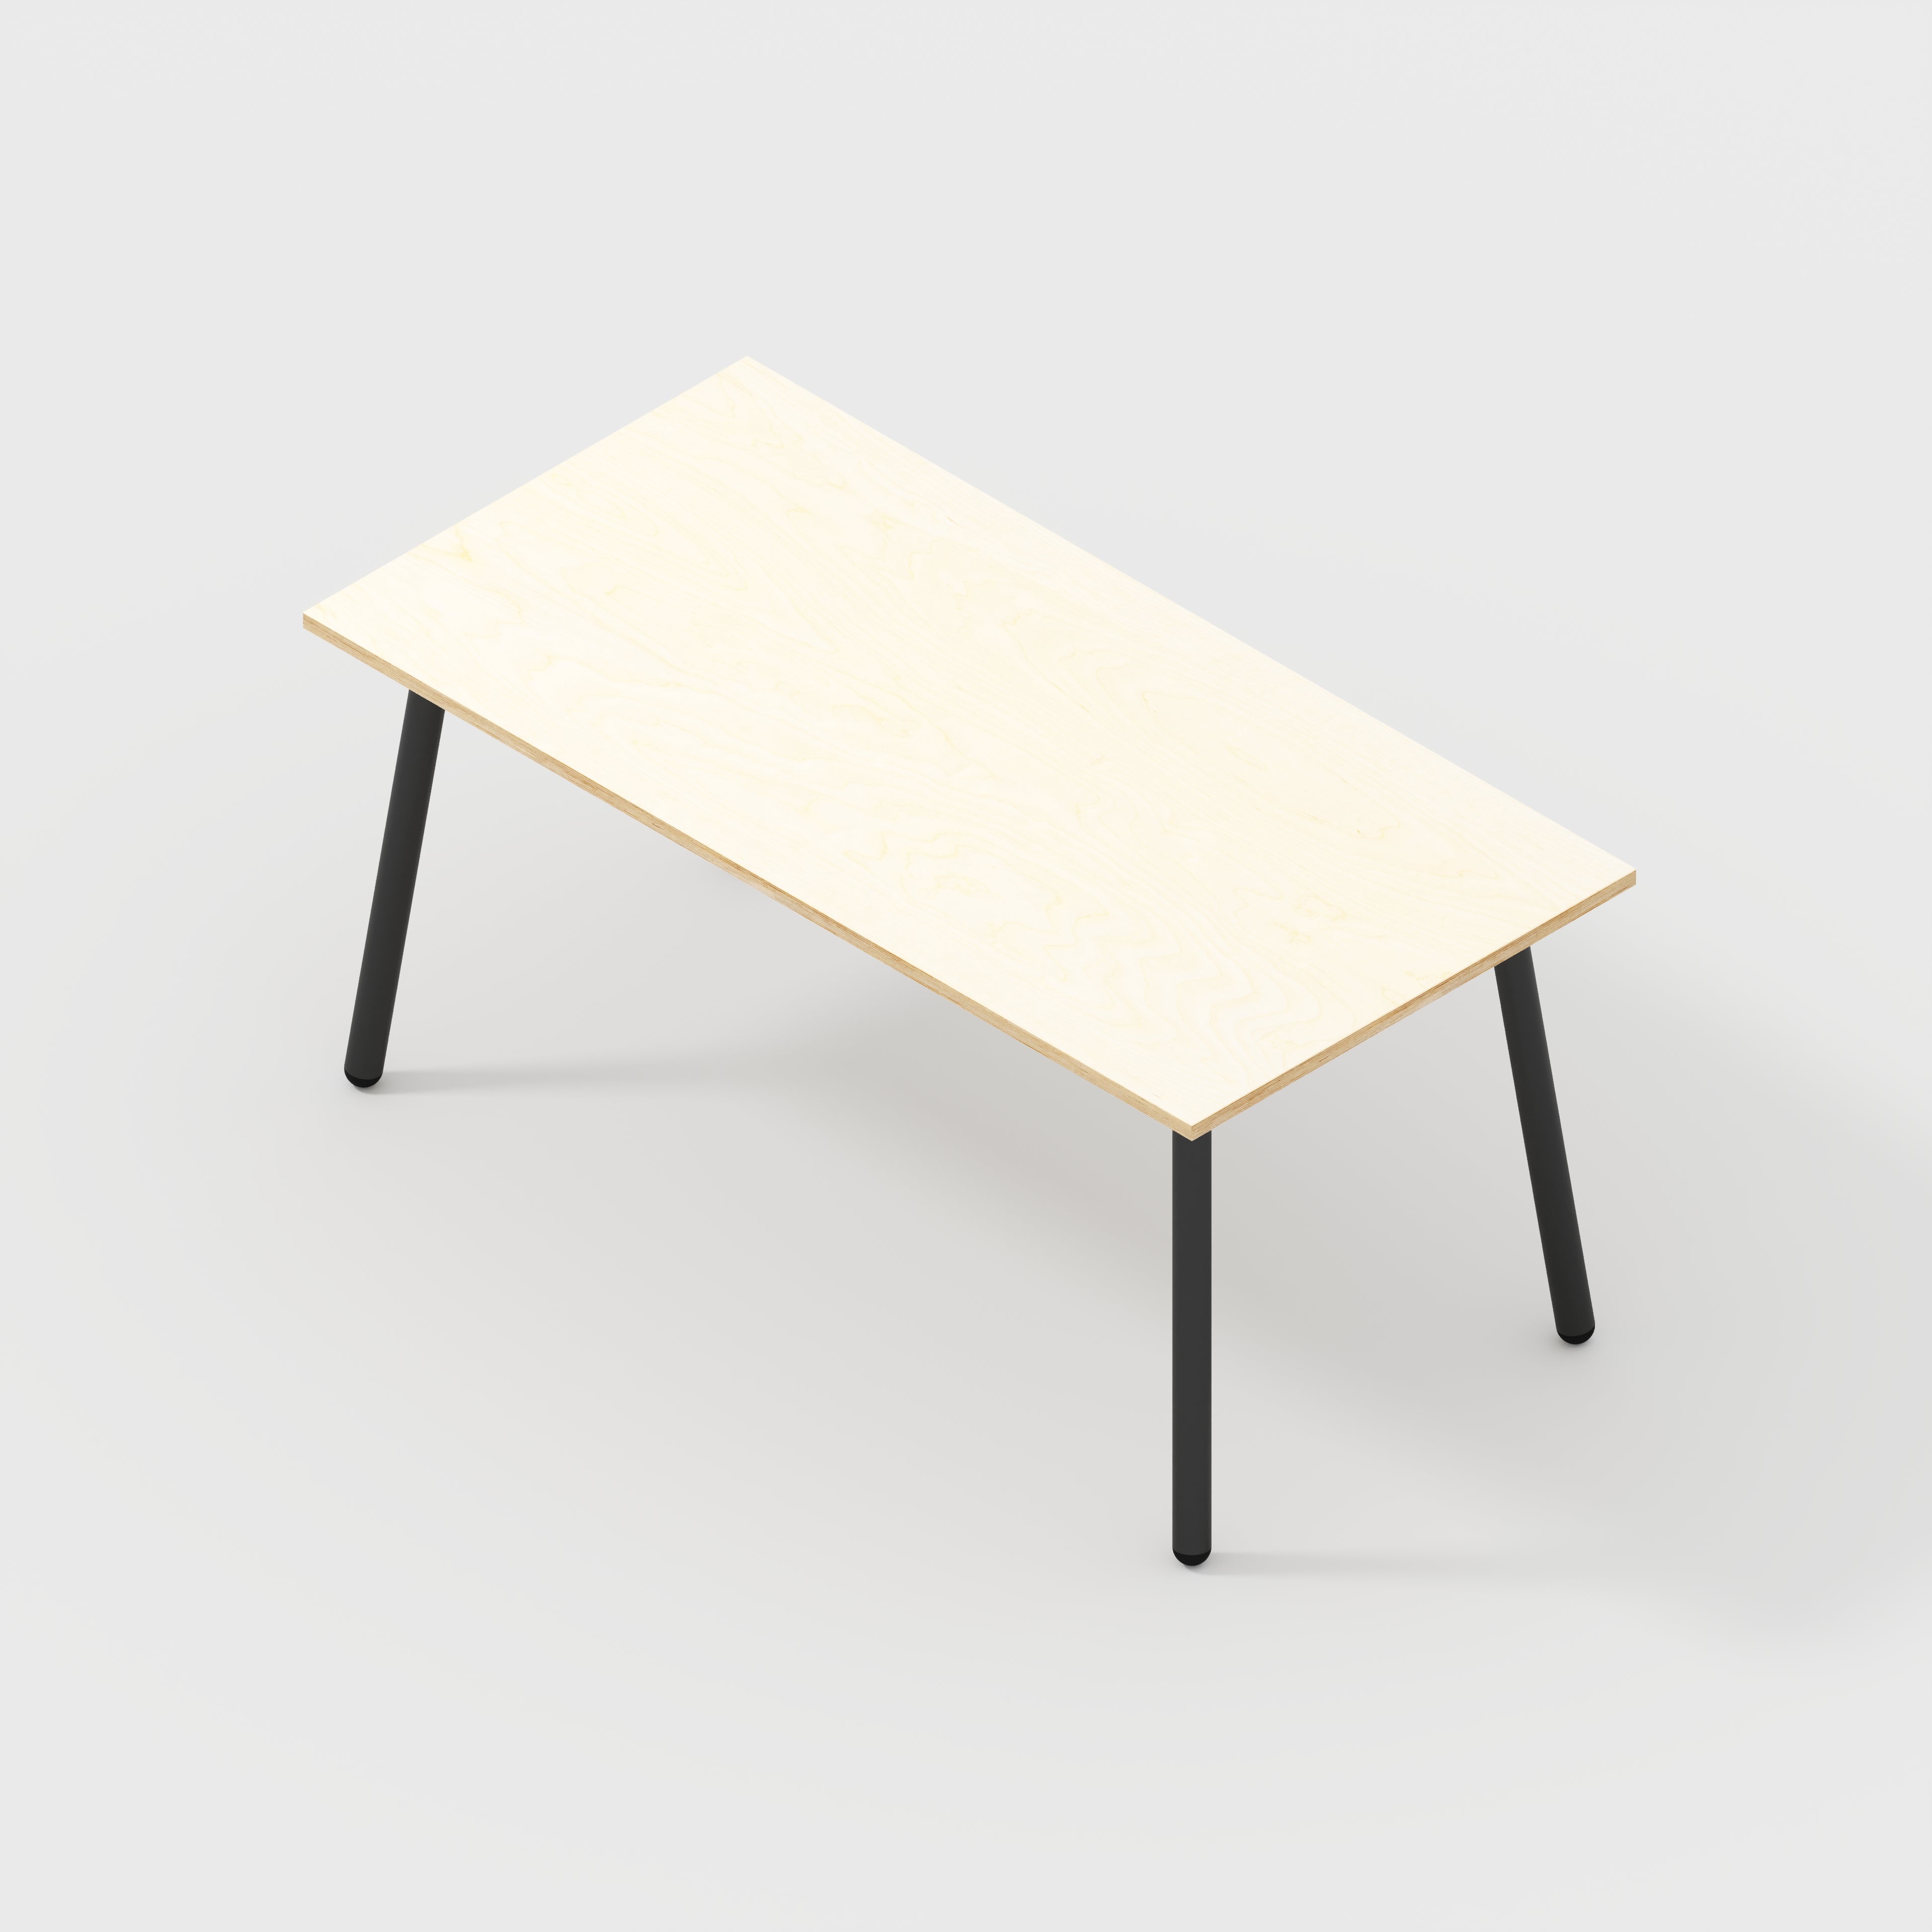 Table with Black Round Single Pin Legs - Plywood Birch - 1680(w) x 1040(d) x 735(h) - 30mm - Profiled Edge